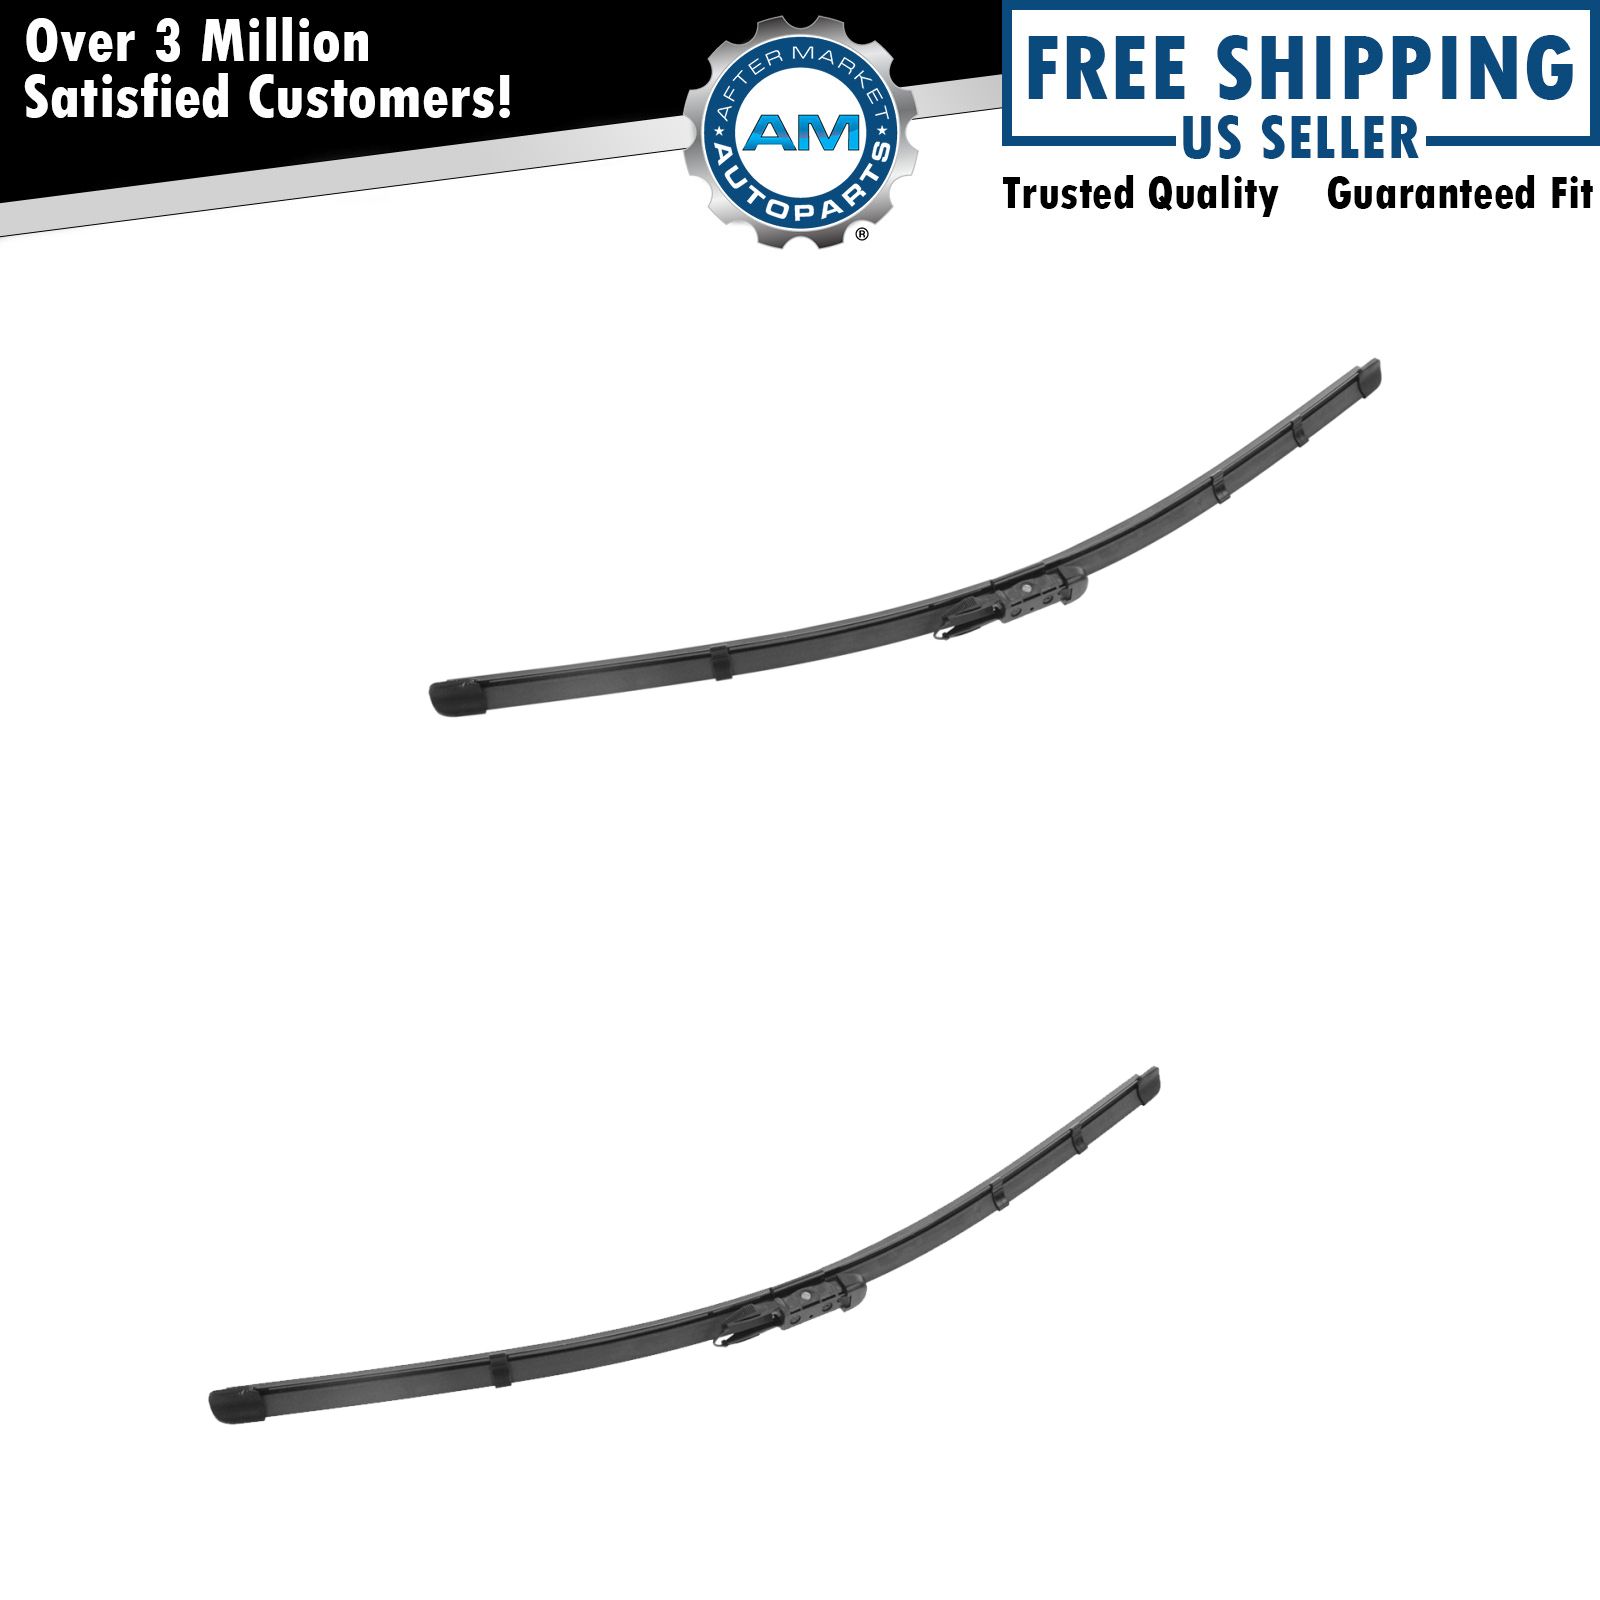 OEM 25877402 Windshield Wiper Blade Front Pair for Chevy GMC Cadillac Truck SUV